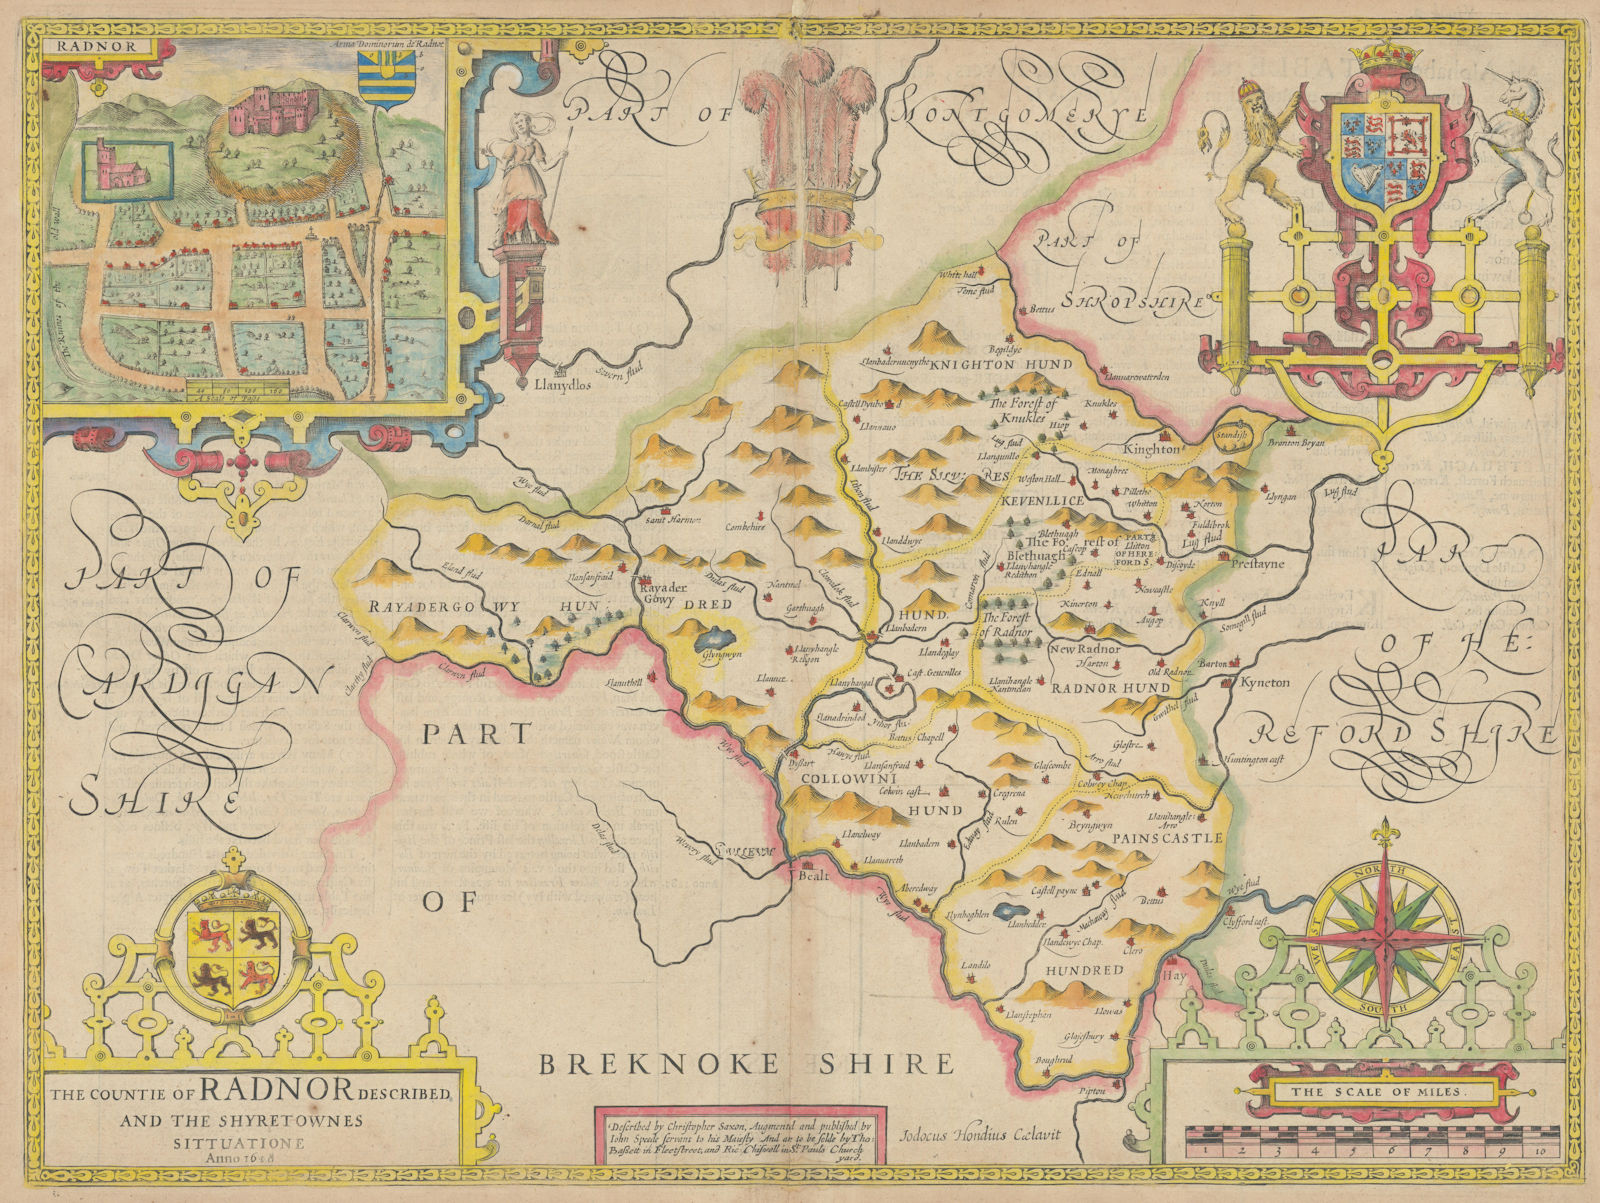 Associate Product Countie of Radnor. Shire/county map by John Speed. Bassett/Chiswell edition 1676